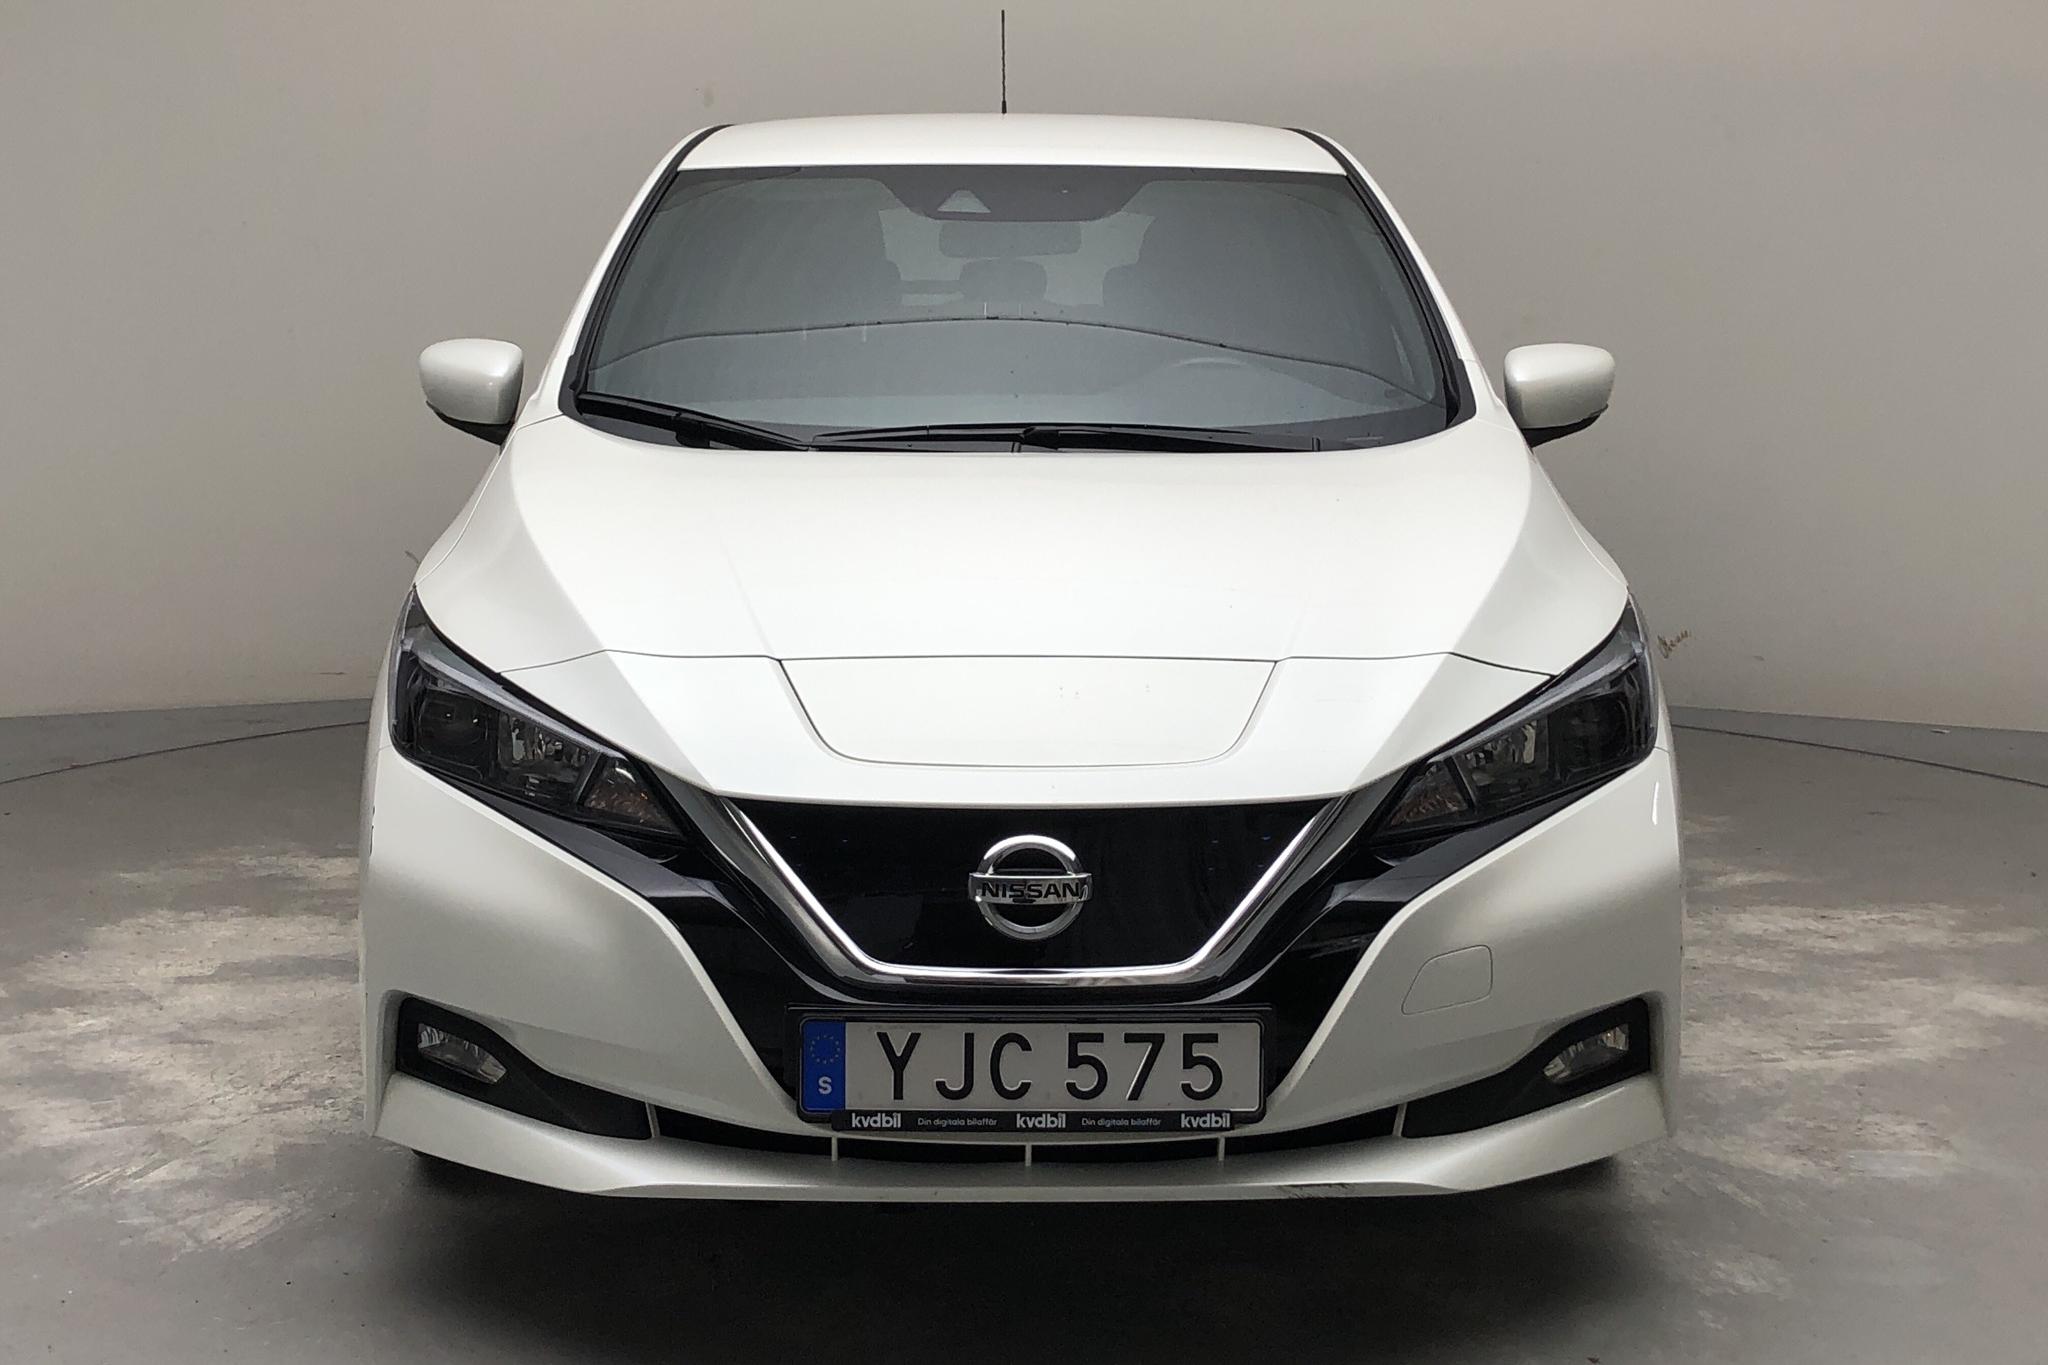 Nissan LEAF 5dr 39 kWh (150hk) - 29 000 km - Automatic - white - 2018